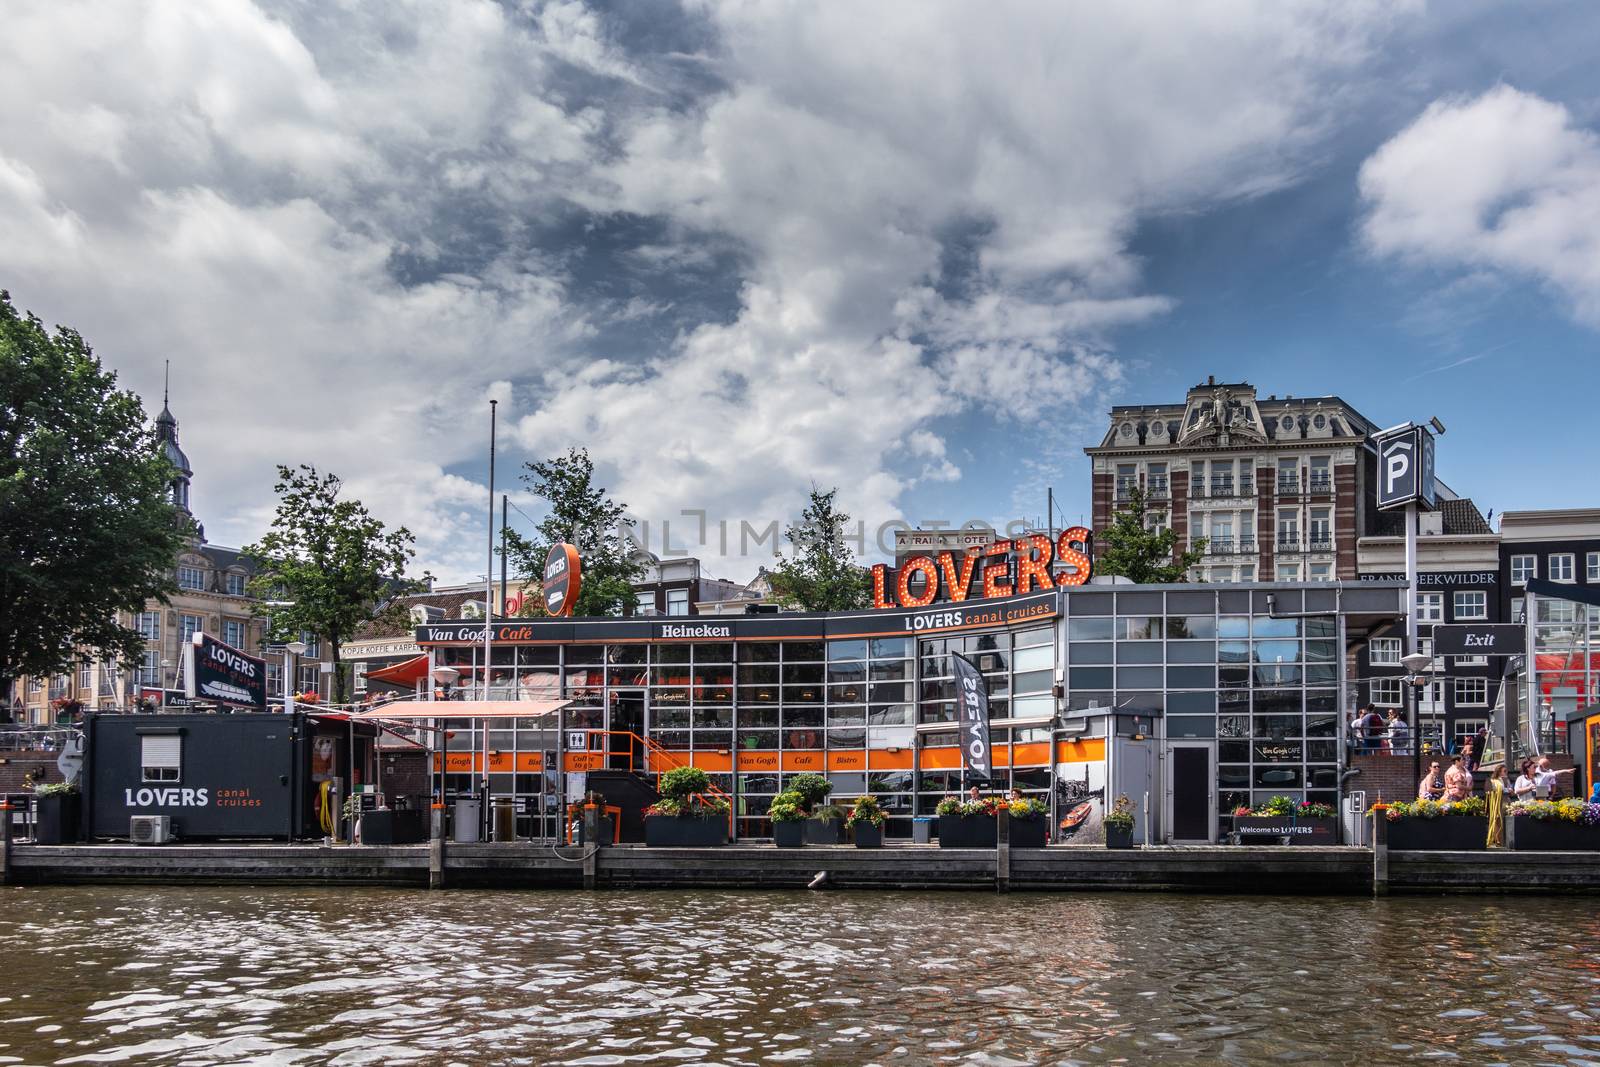 Amsterdam, the Netherlands - June 30, 2019: gray white cloudscape with blue patches above Orange decorated Lovers Canal cruises office along canal. Some green foliage and houses in back.